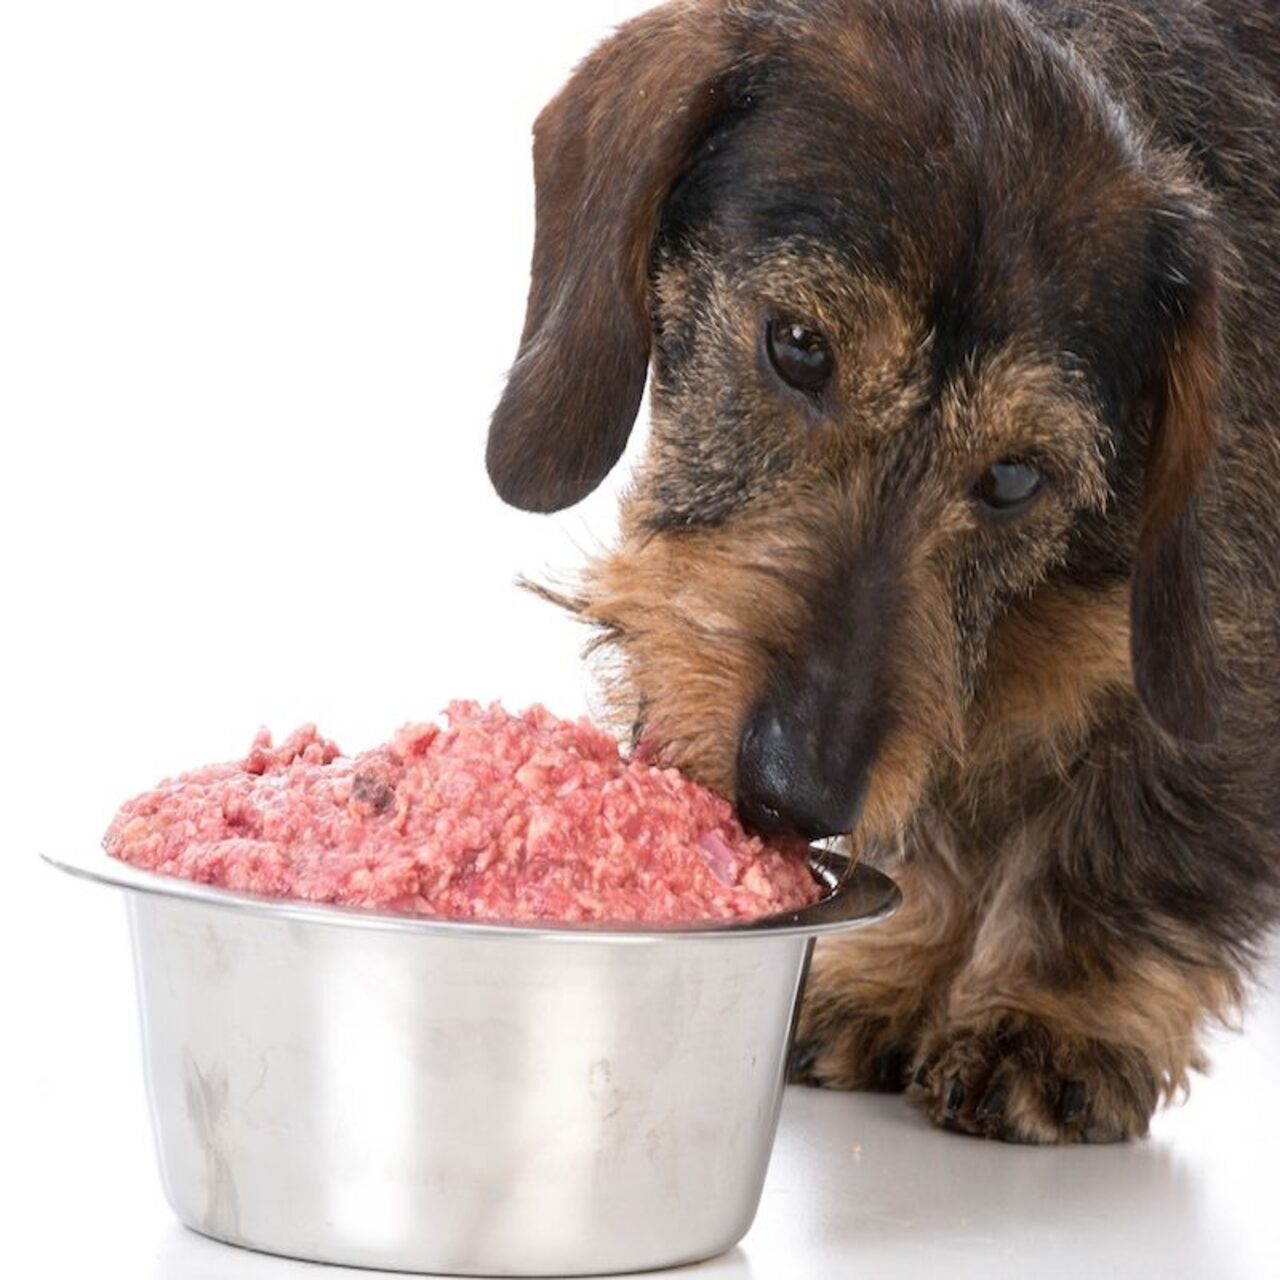 Free delivery of Raw and cooked foods for your healthy pets in canberra.